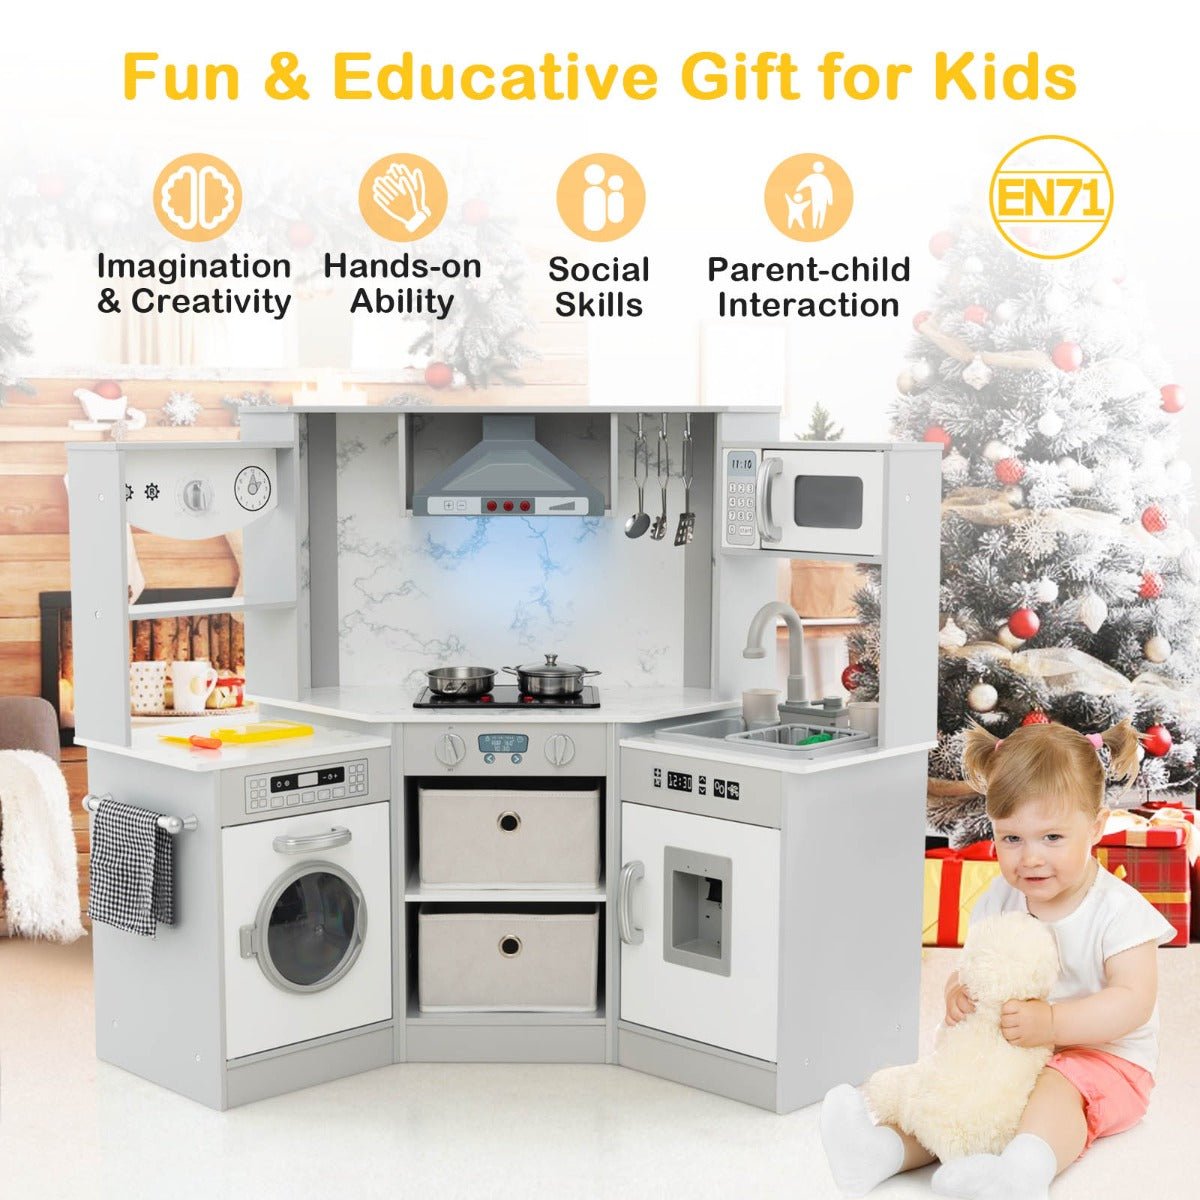 Play Kitchen with Range Hood & Stove Detailing